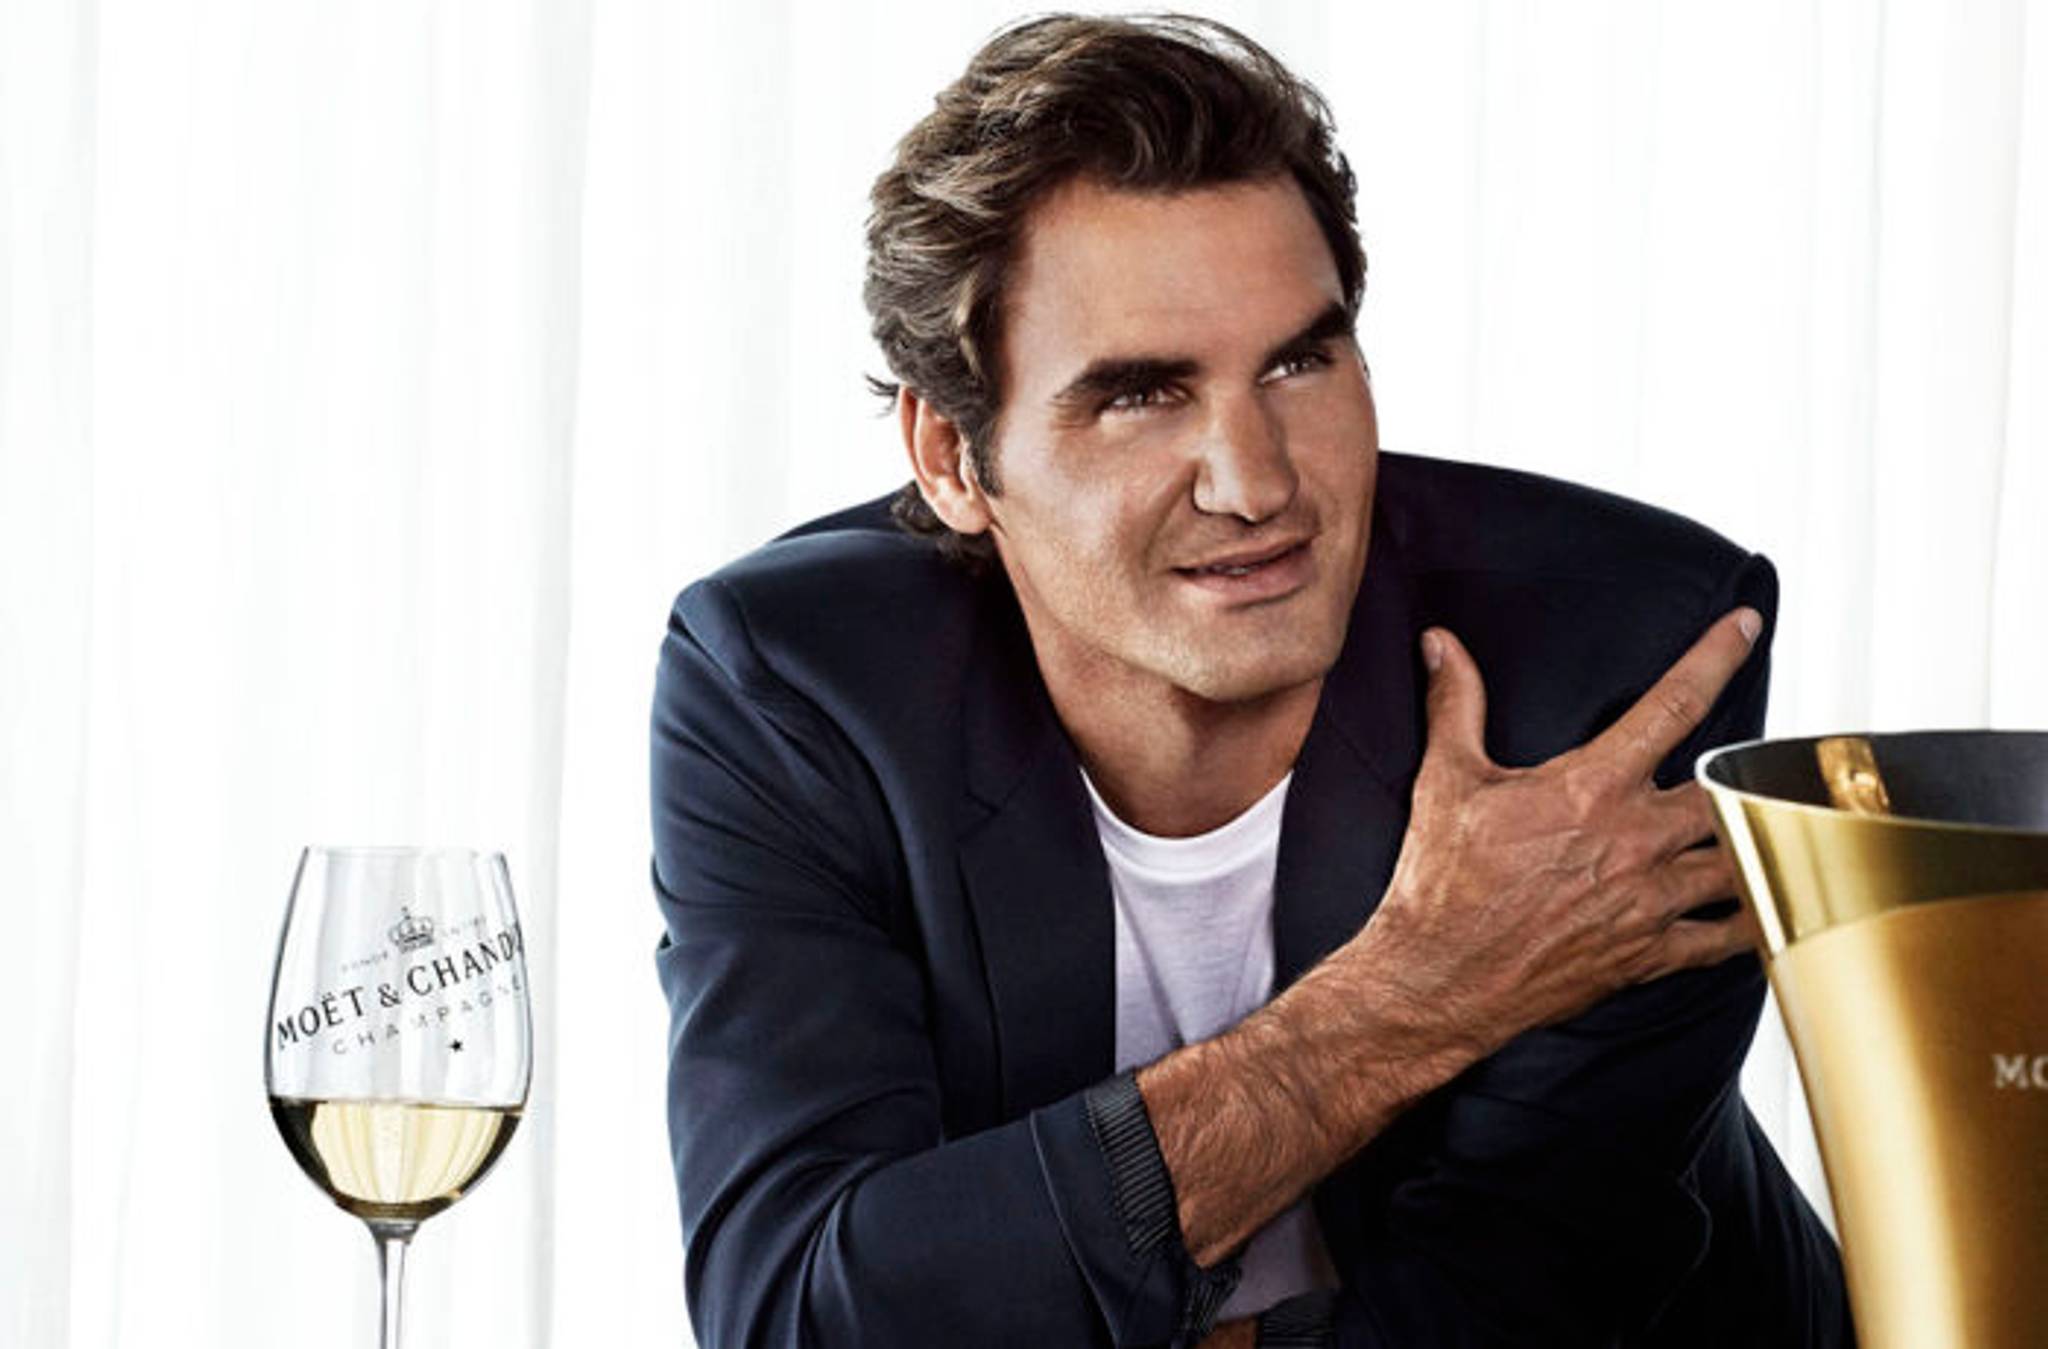 Moet signals its quality with Federer champers collab